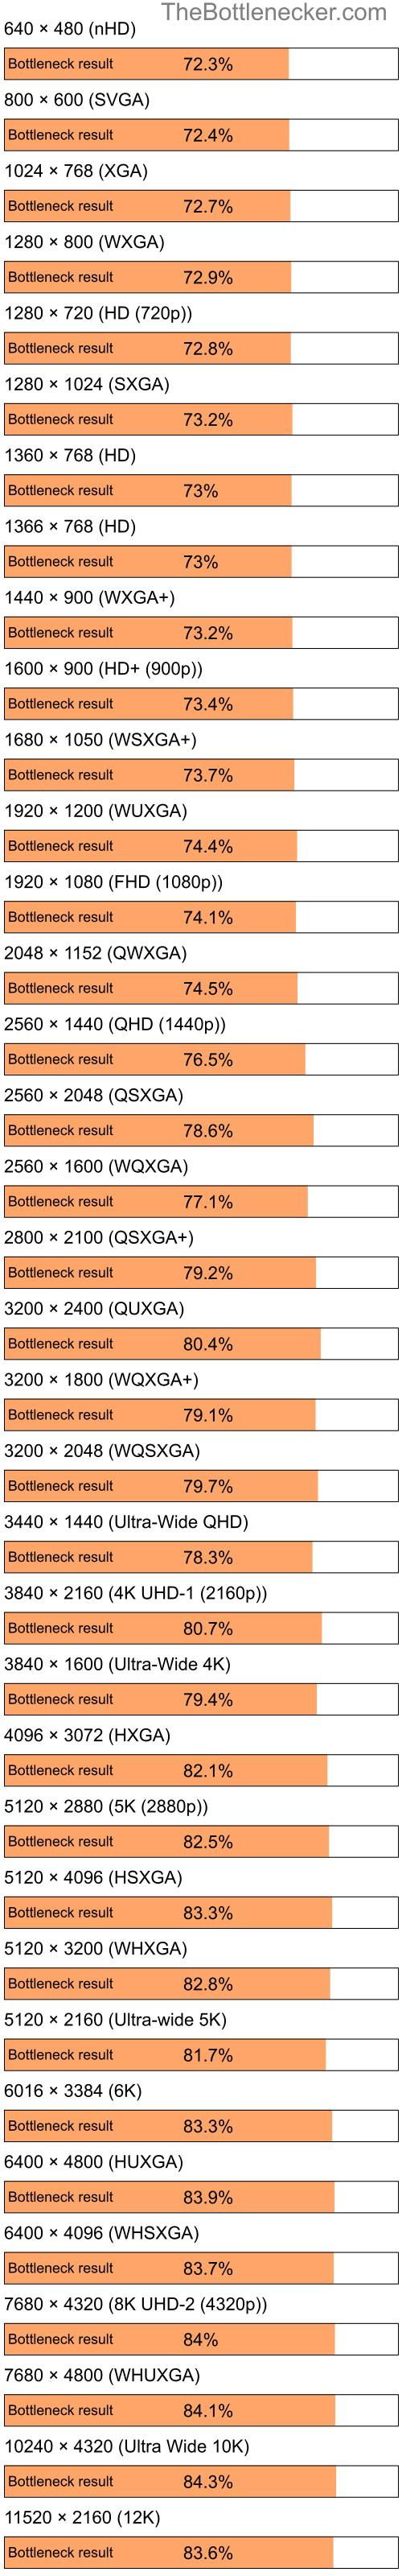 Bottleneck results by resolution for Intel Celeron and AMD Mobility Radeon X2300 in General Tasks